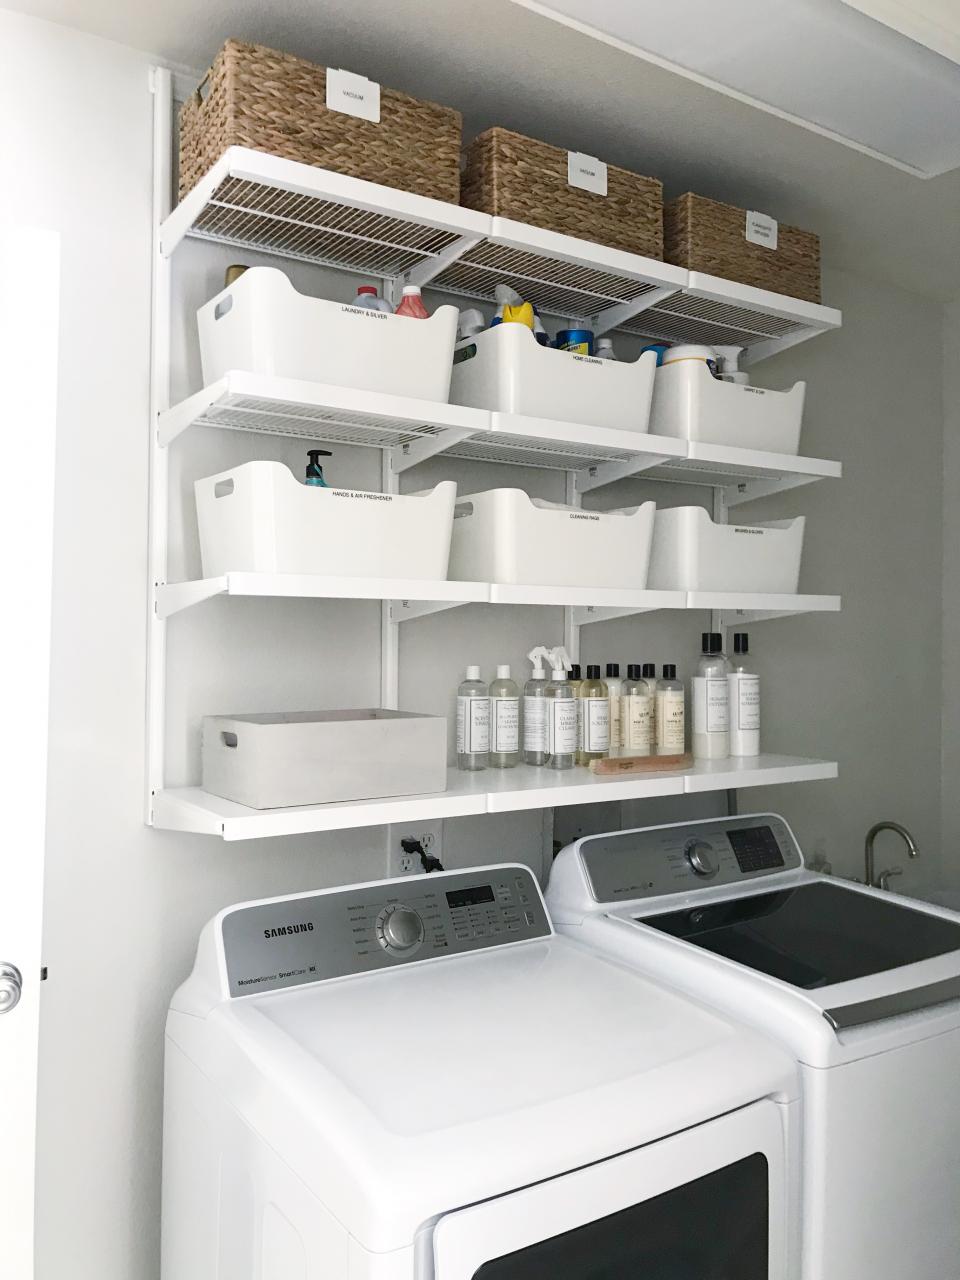 Expandable Laundry Room Shelves With Closet Rod, 64 120 White Wire Wall